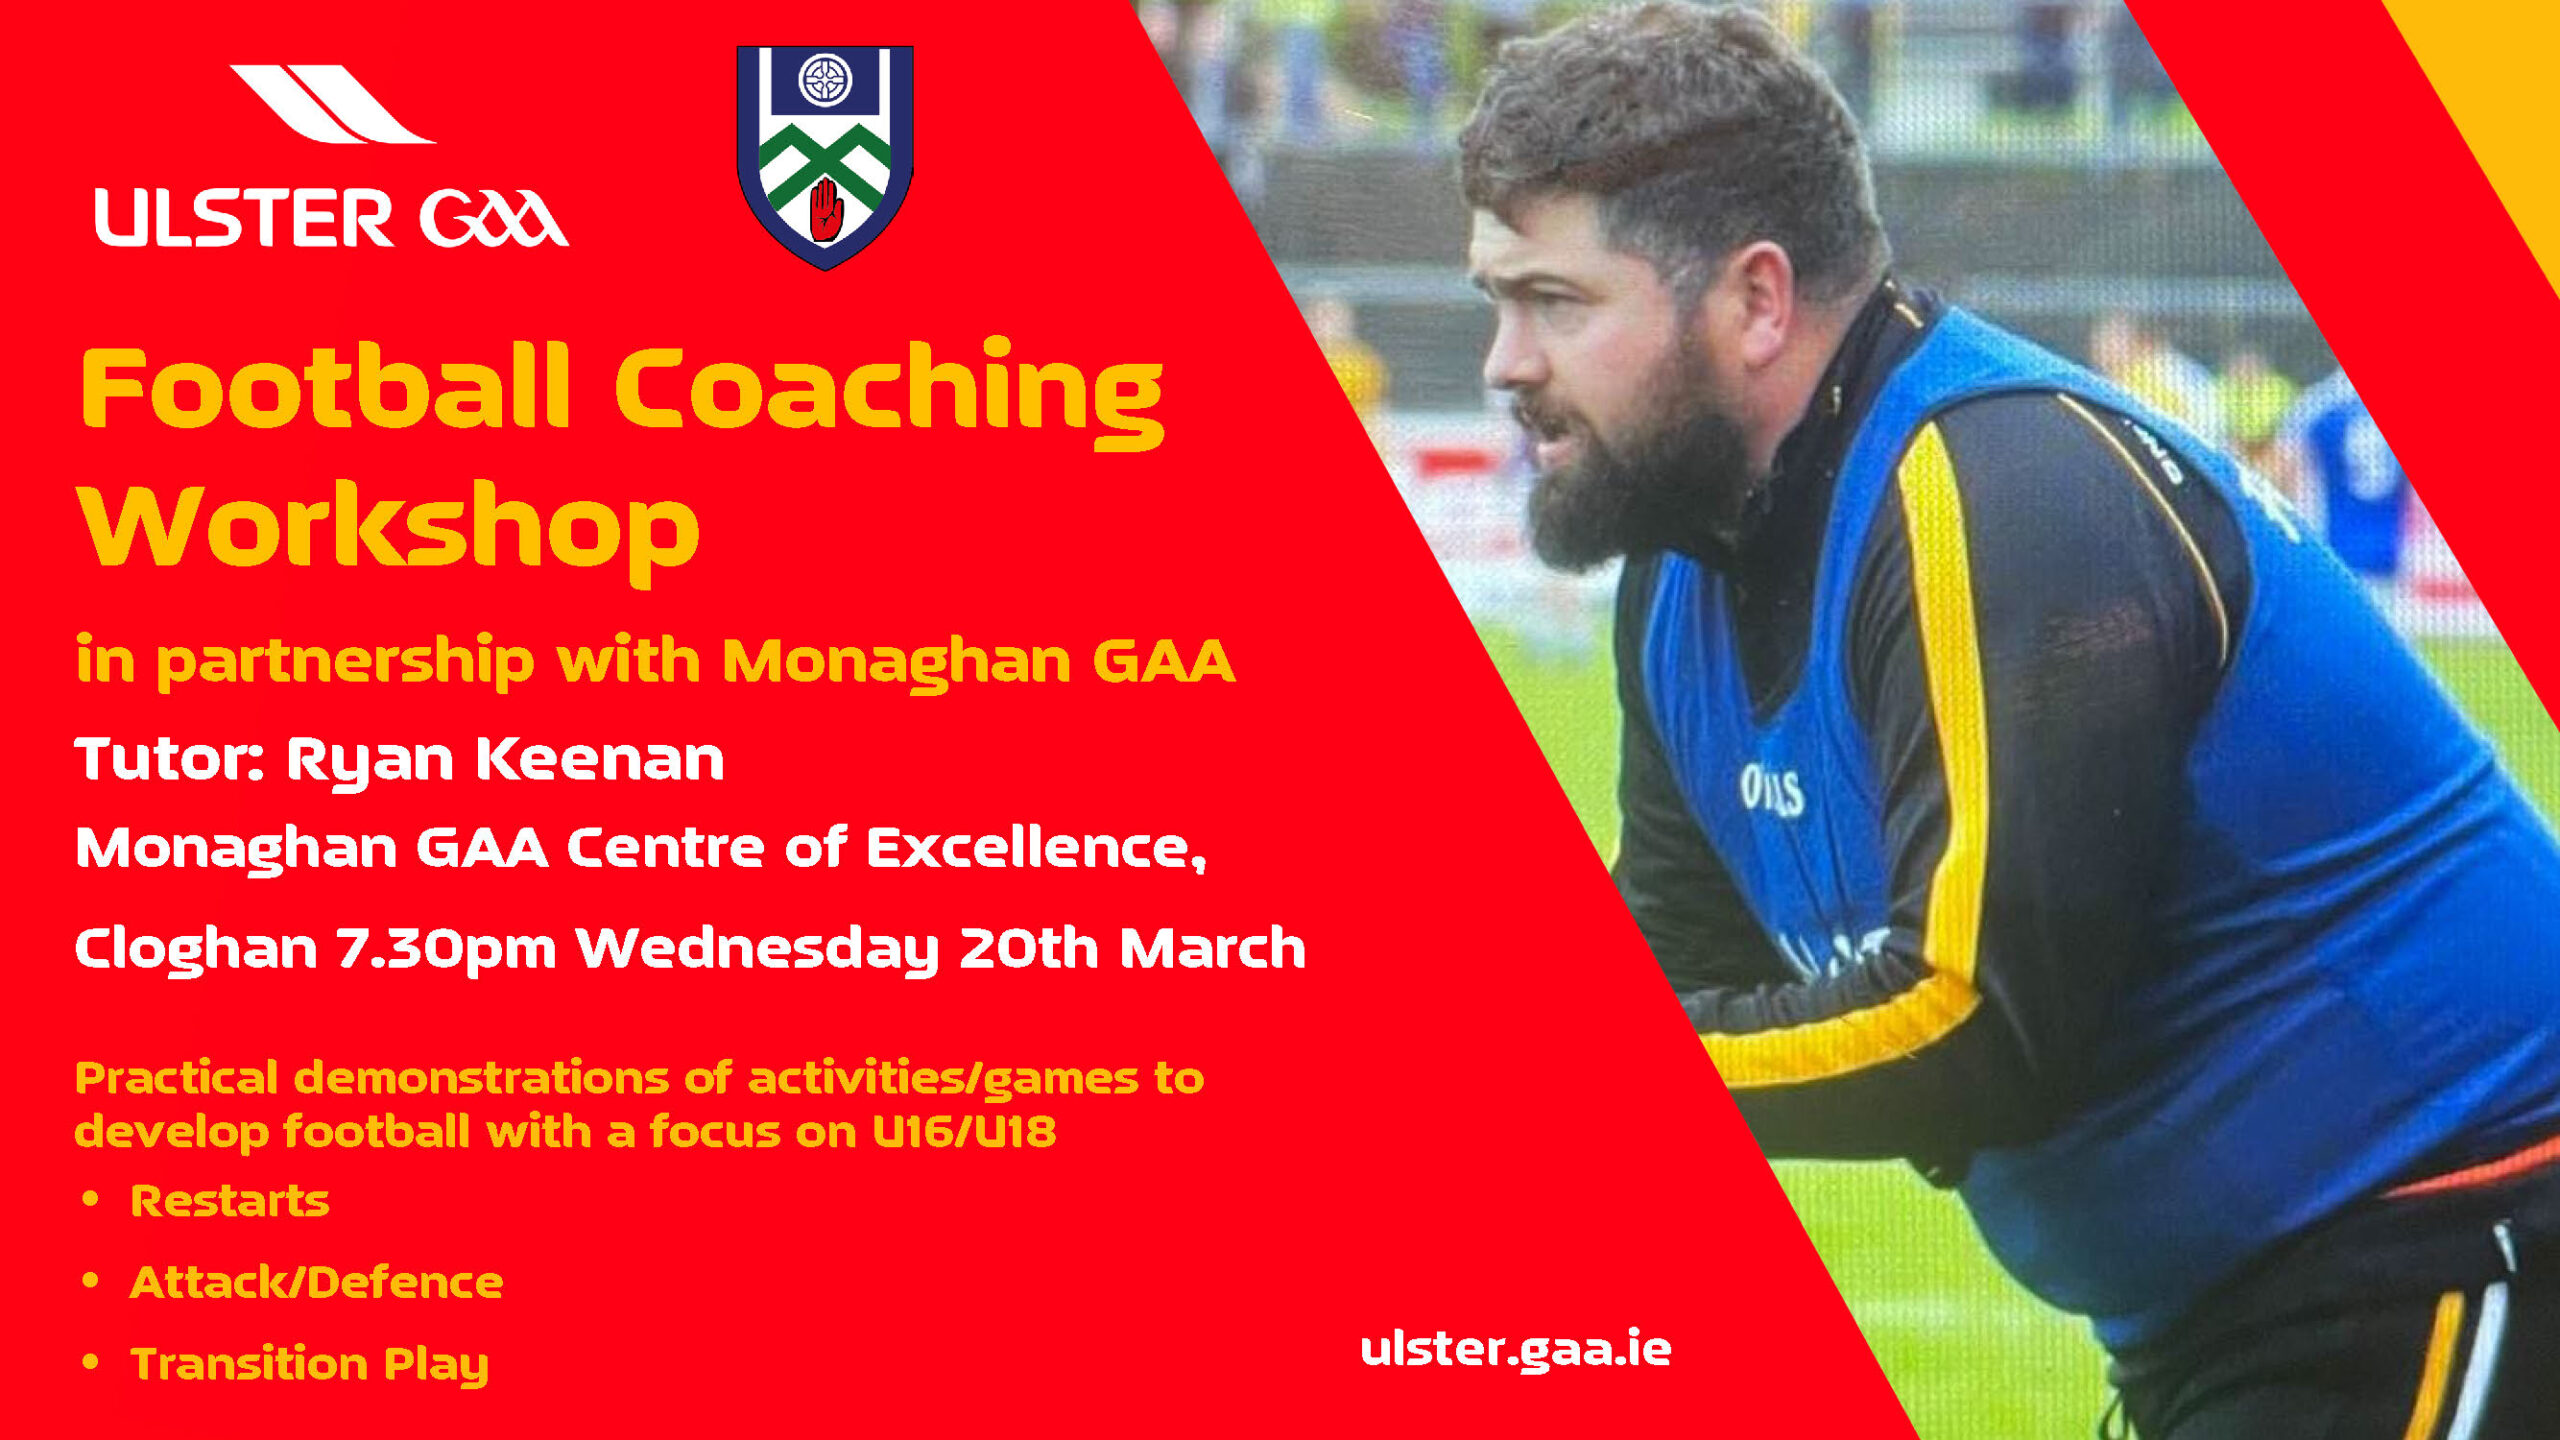 Football Practical Coaching Workshop _ On Wednesday 20th March @ 7:30pm in Cloghan